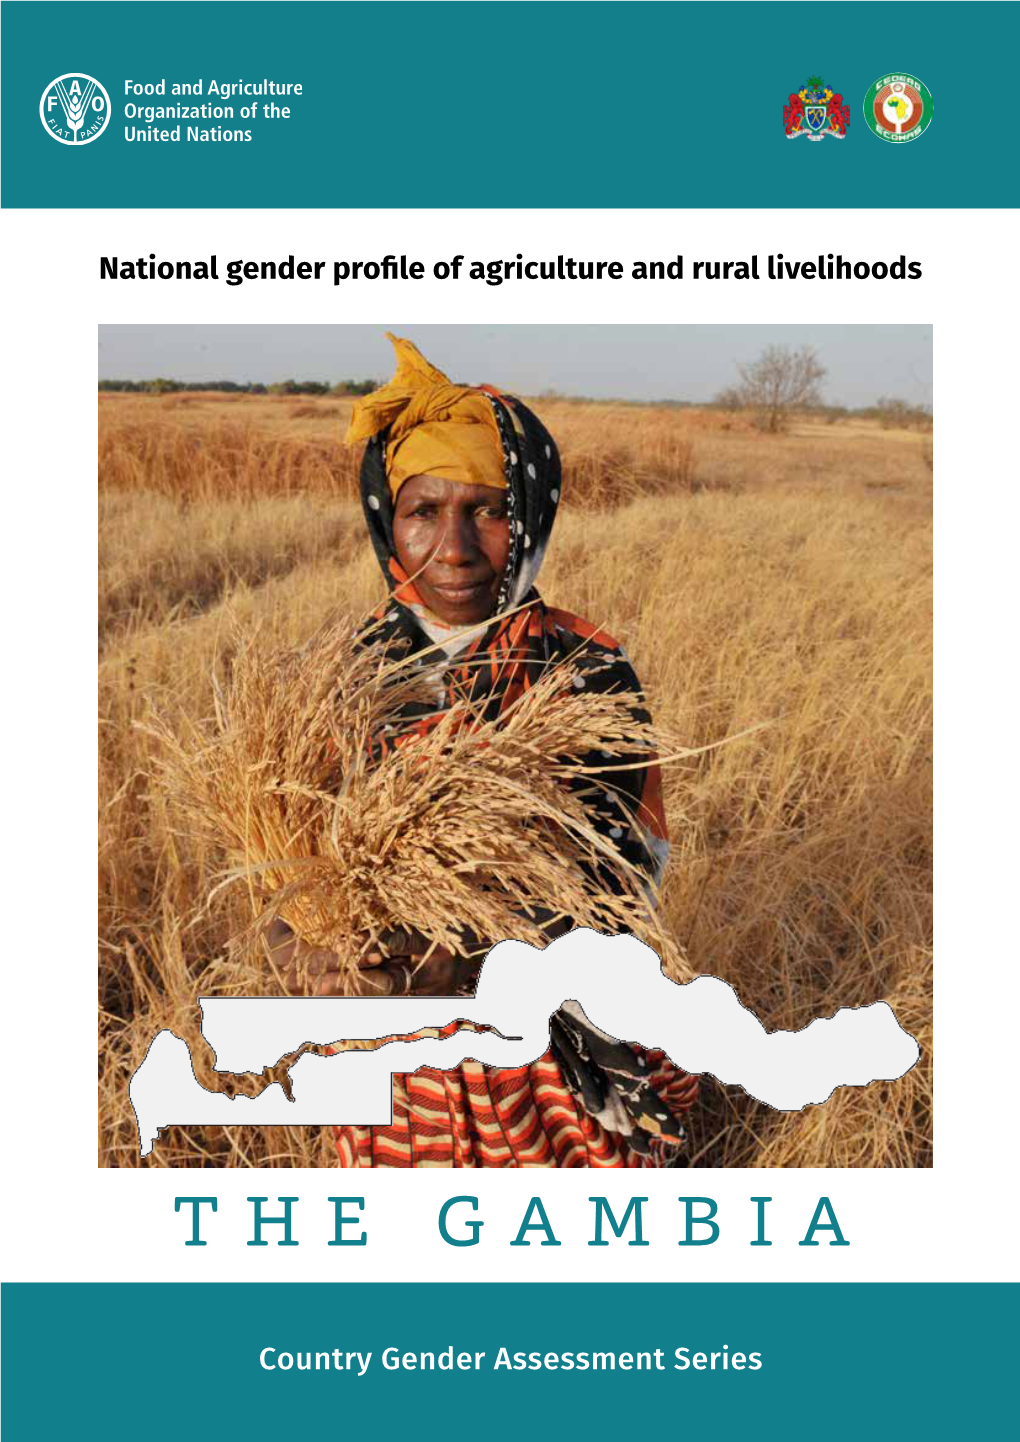 National Gender Profile of Agriculture and Rural Livelihoods – the Gambia